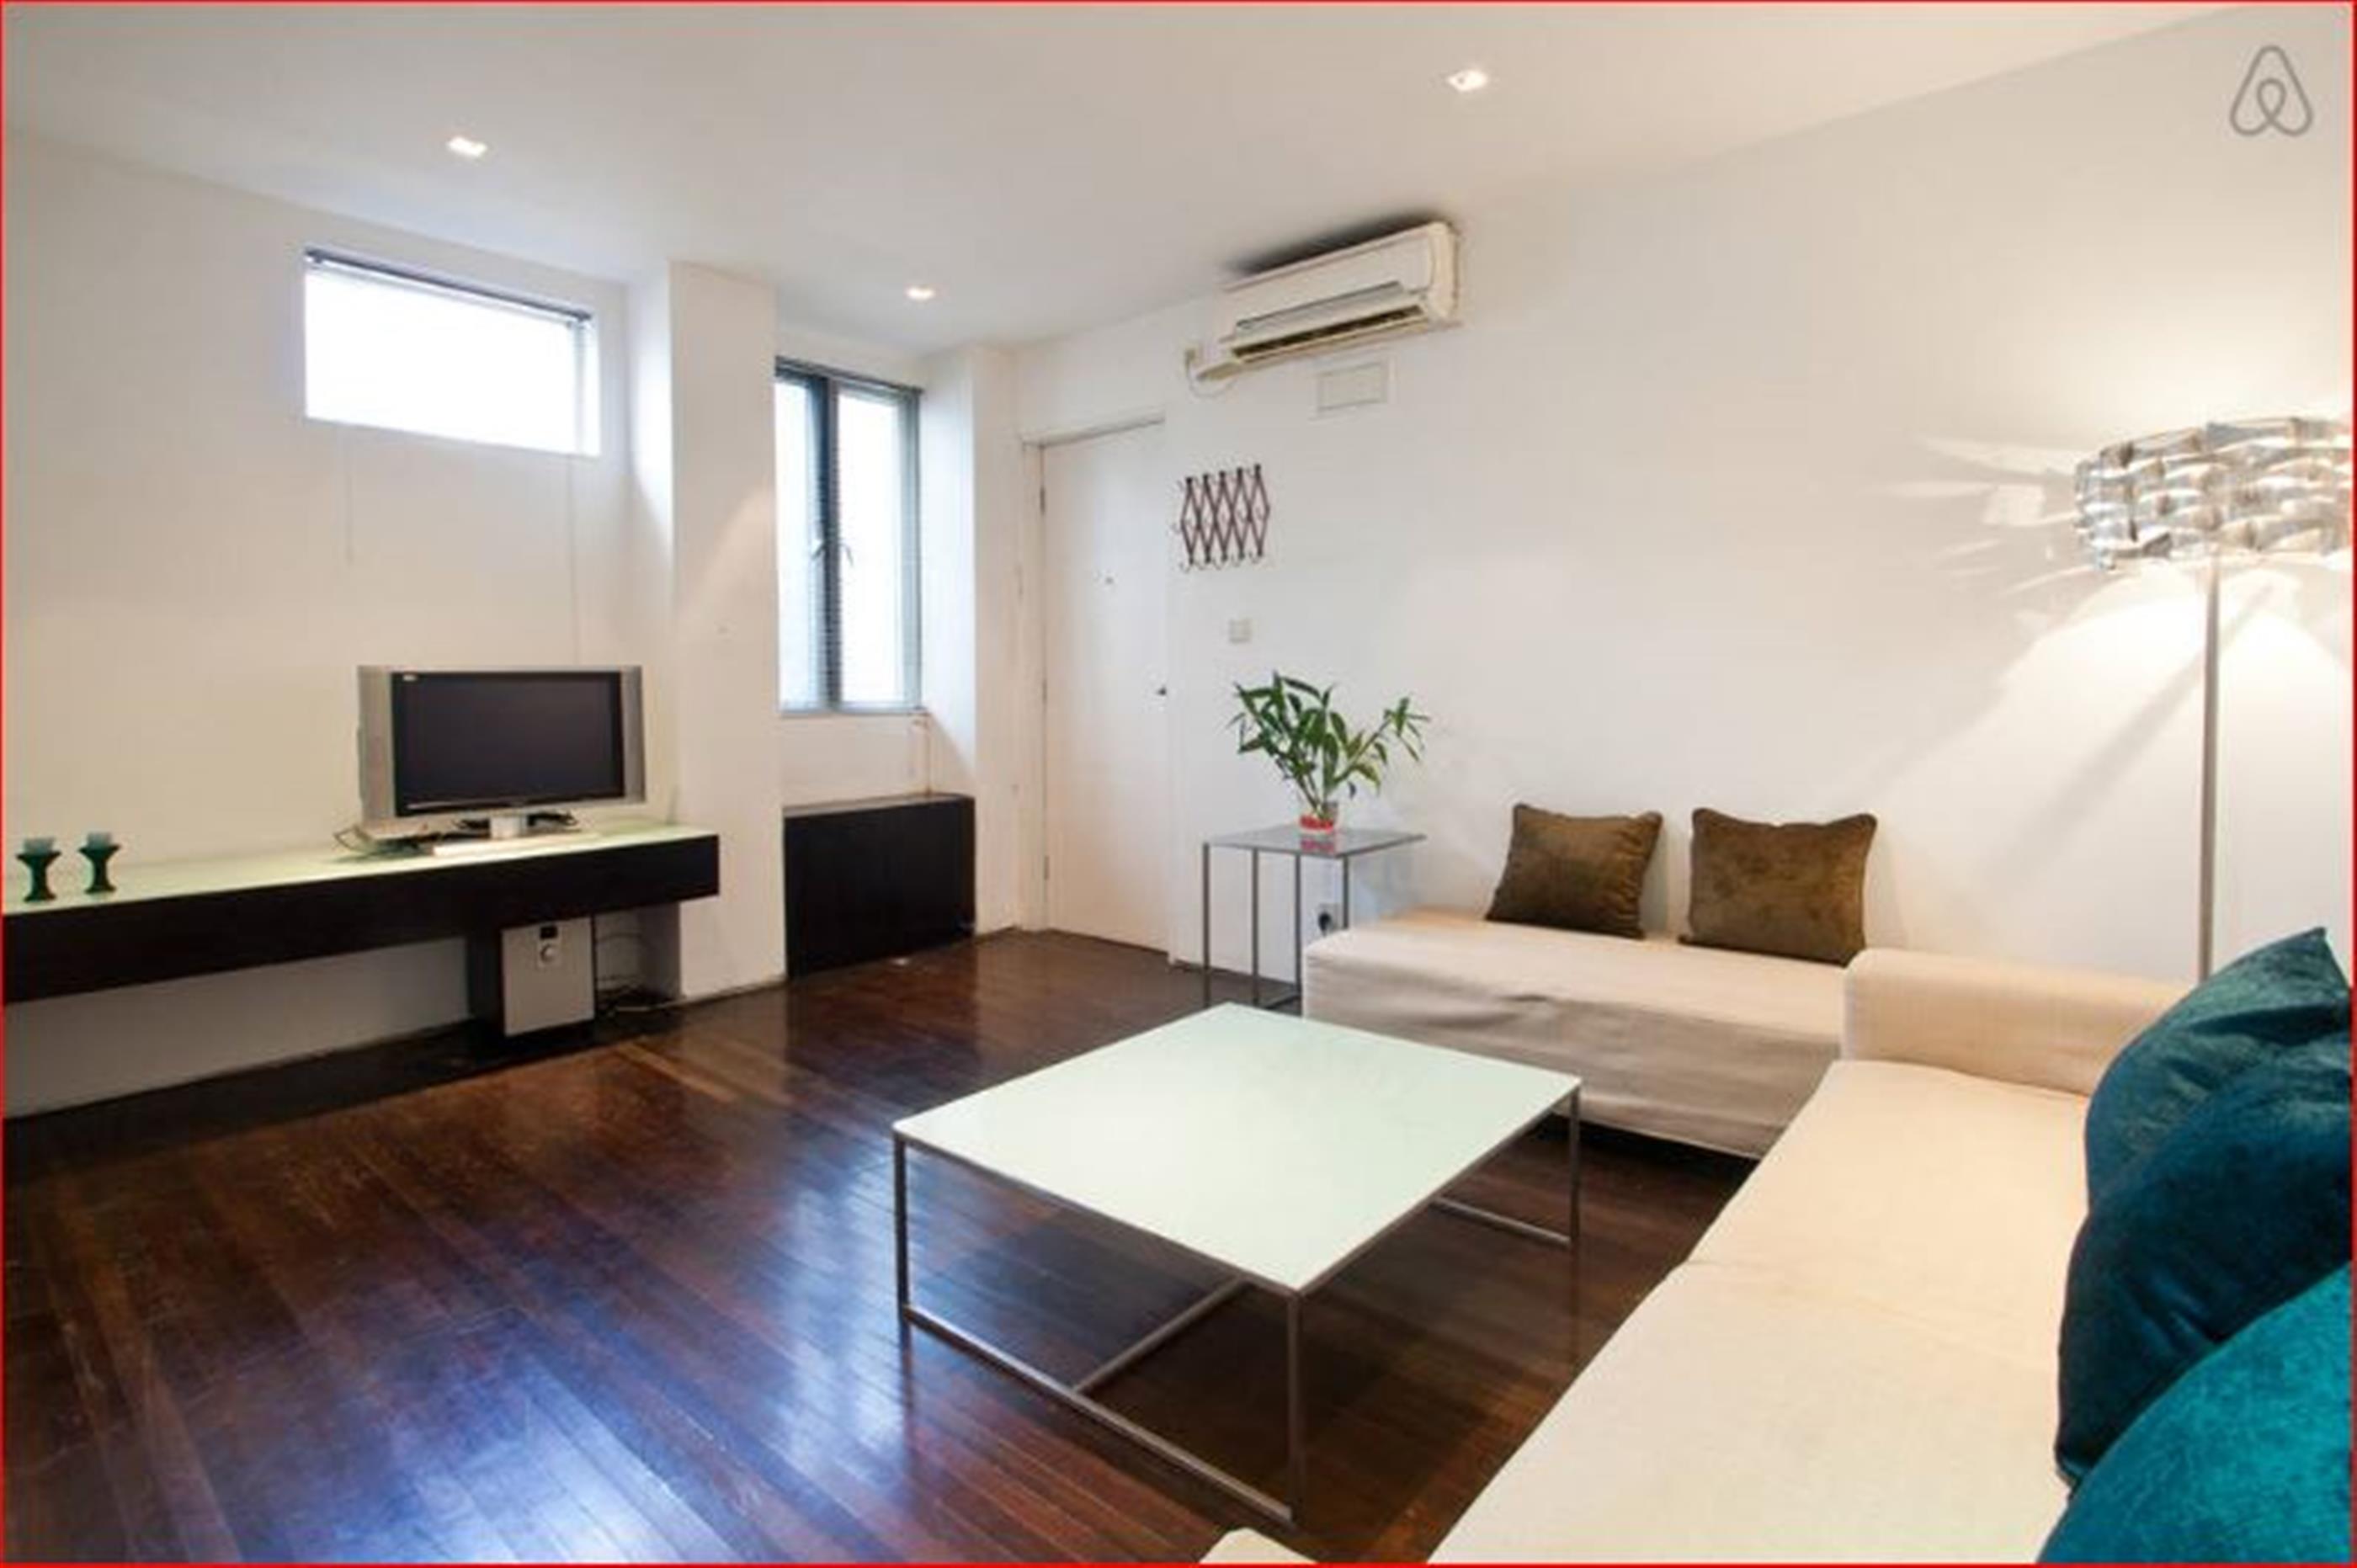 open living space Renovated Bright Spacious Modern FFC 1BR Apt nr LN1/2/7/10/11 in Shanghai for Rent